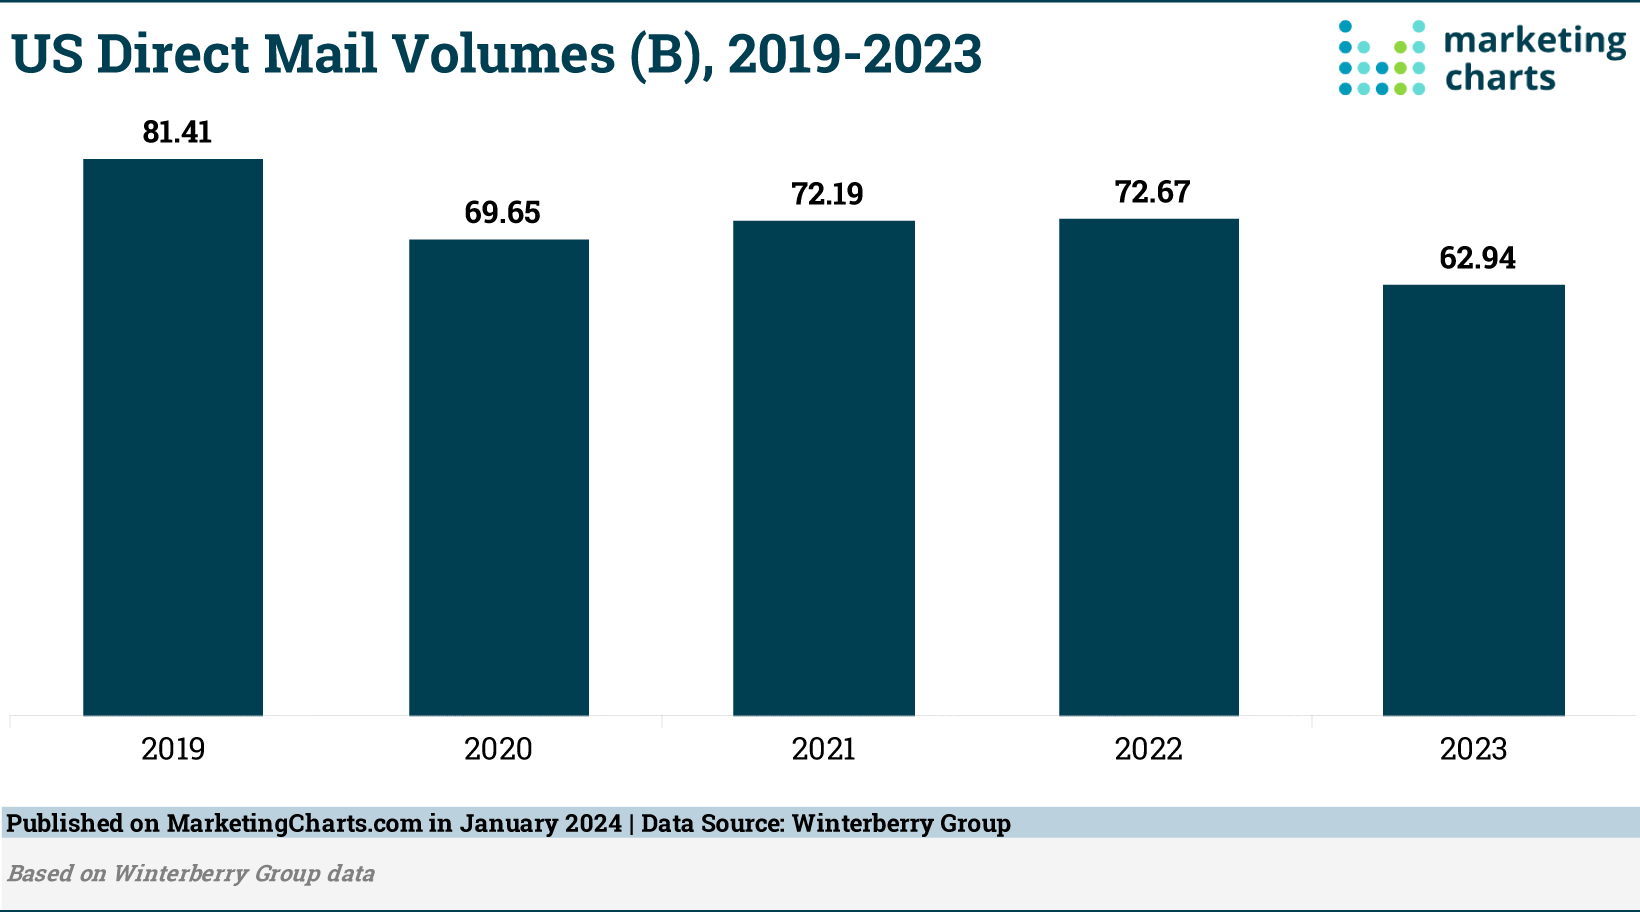 2023: A Down Year for Direct Mail